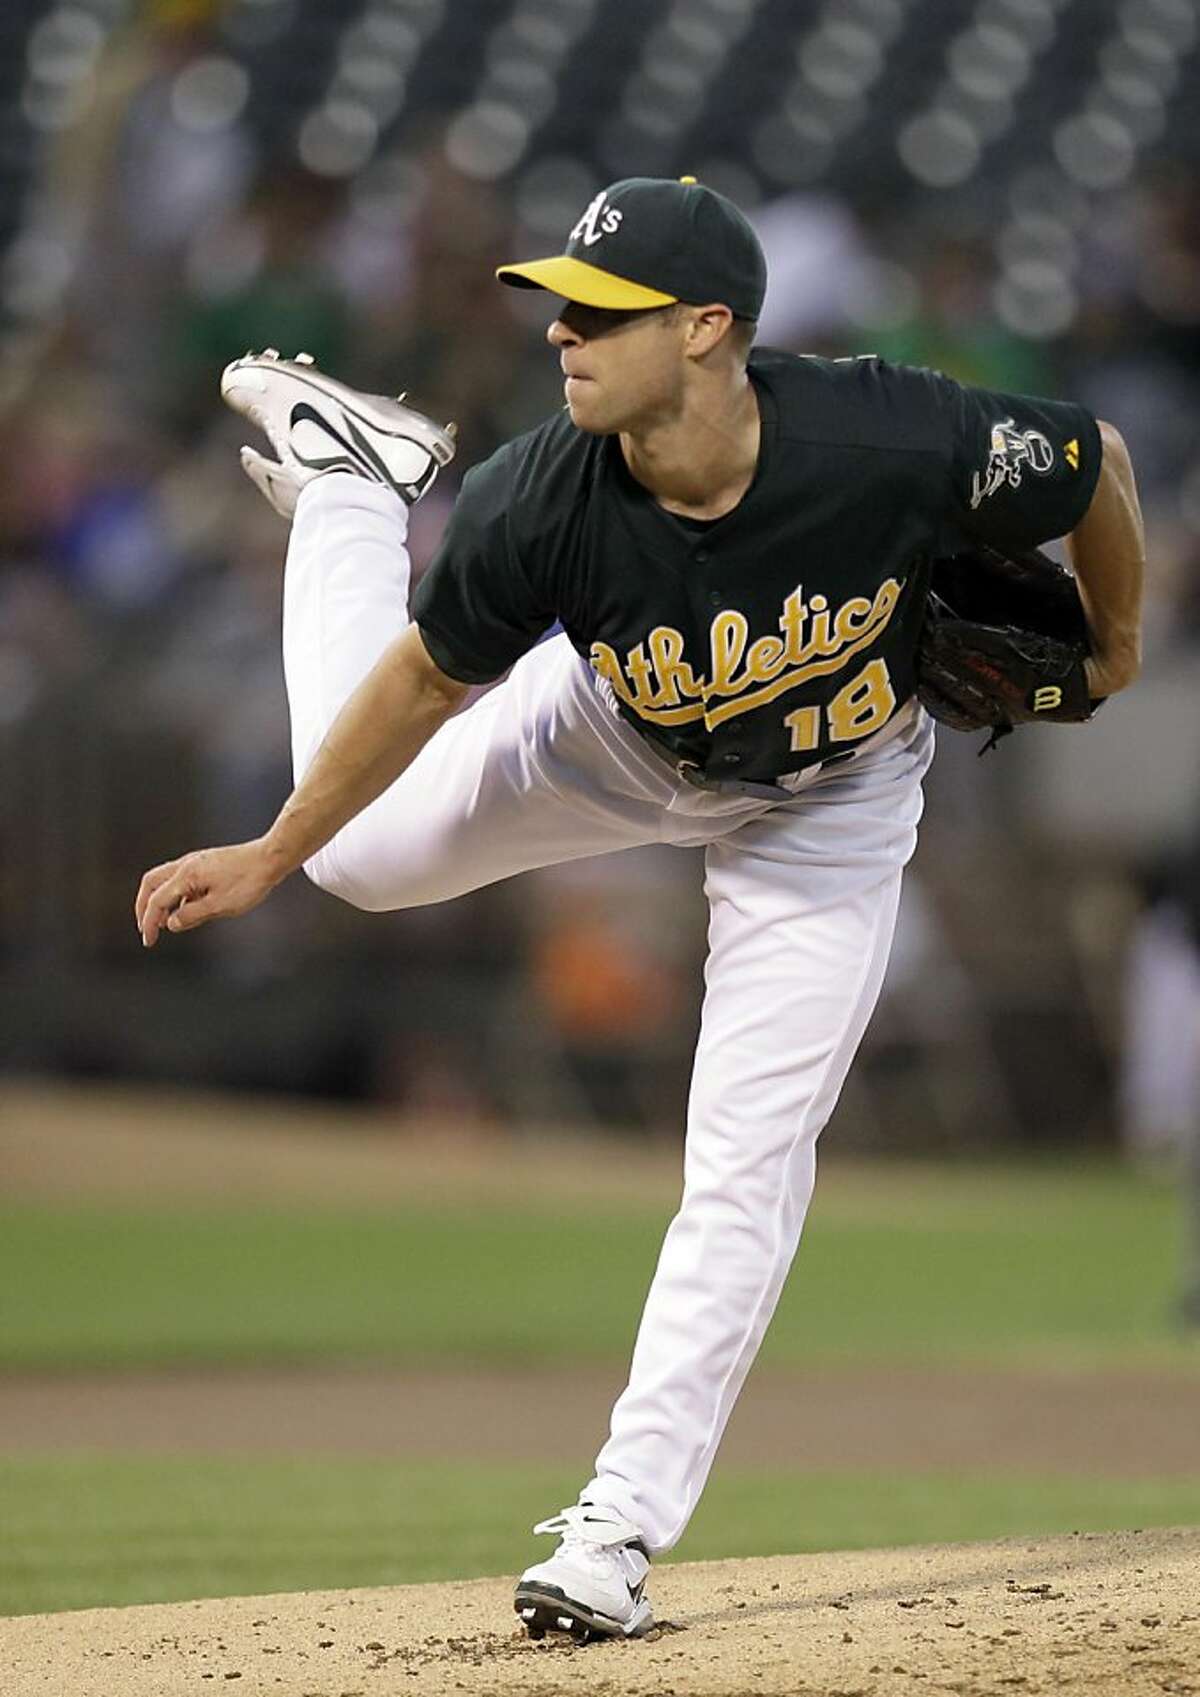 Oakland Athletics' Rich Harden works against the Texas Rangers in the first inning of a baseball game Tuesday, Sept. 20, 2011, in Oakland, Calif. (AP Photo/Ben Margot)